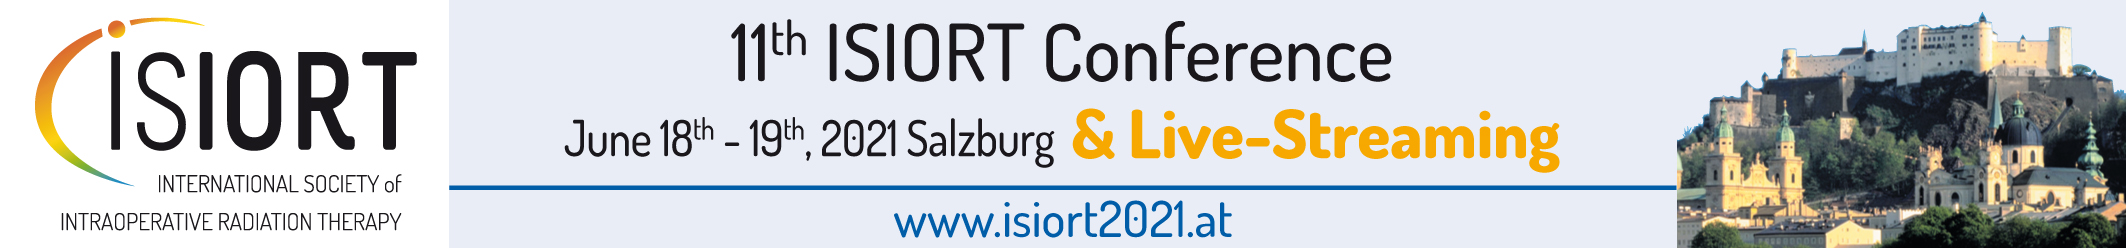 11th ISIORT Conference